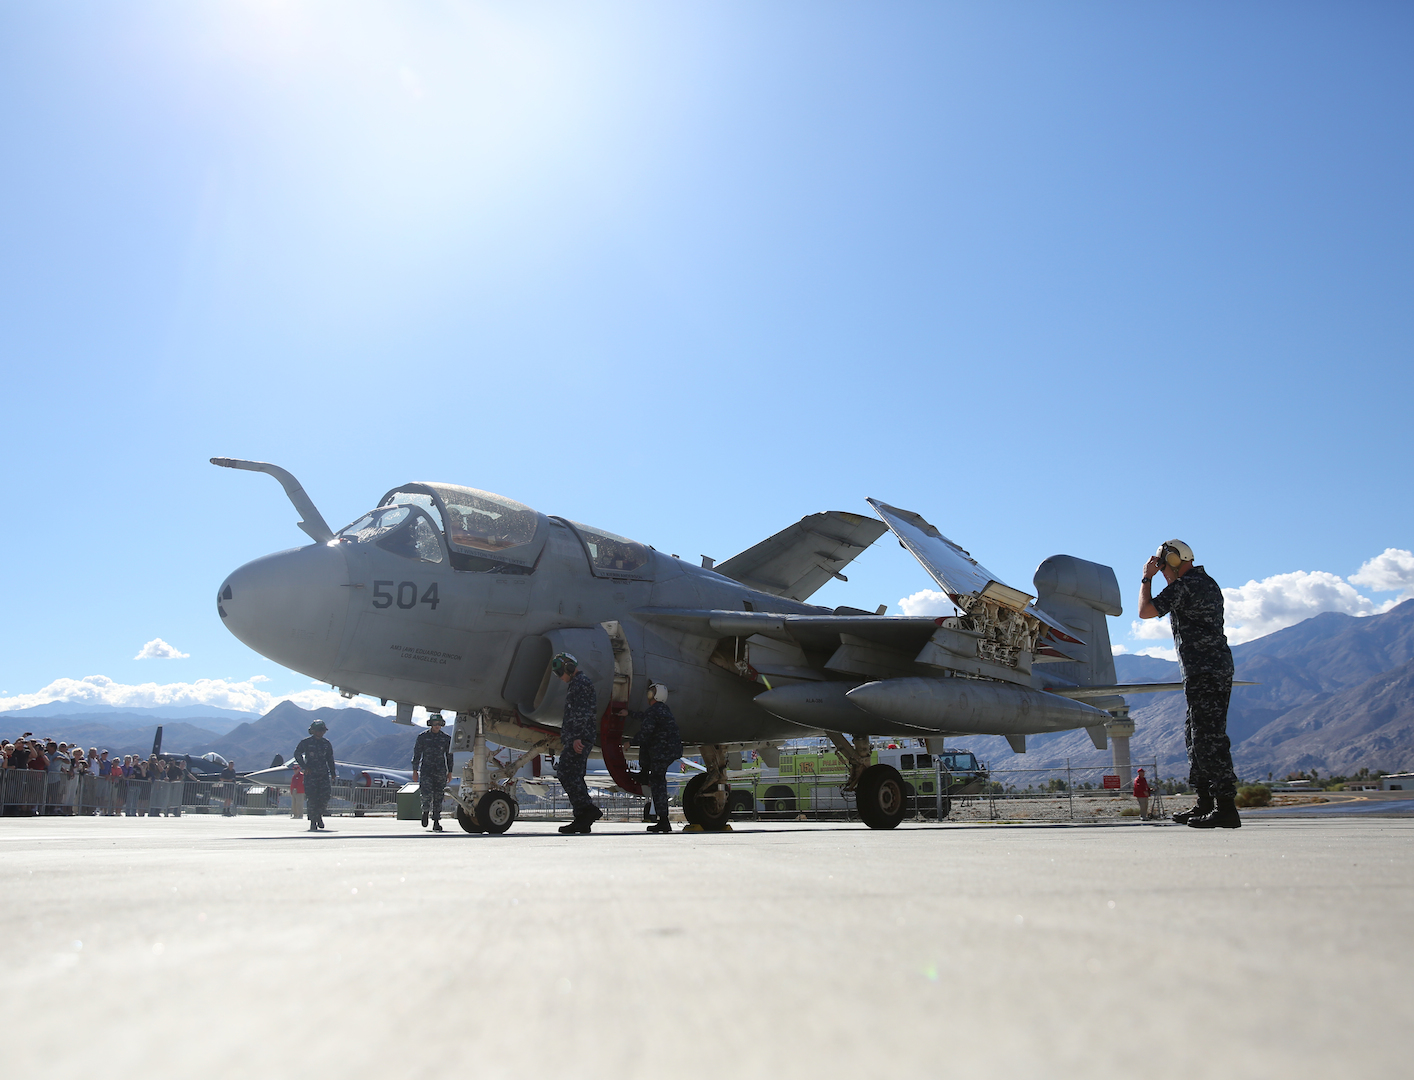 Navy Maintenance team performs post-flight checks on the EA-6B ‘Prowler’ fixed-wing aircraft after it lands for its retirement ceremony at the Palm Springs Air Museum, Nov. 21, 2014. The aircraft was retired after more than 20 years serving the U.S. Navy and will be put on display at the museum. (Official Marine Corps Photo by Lance Cpl. Julio McGraw/Released)